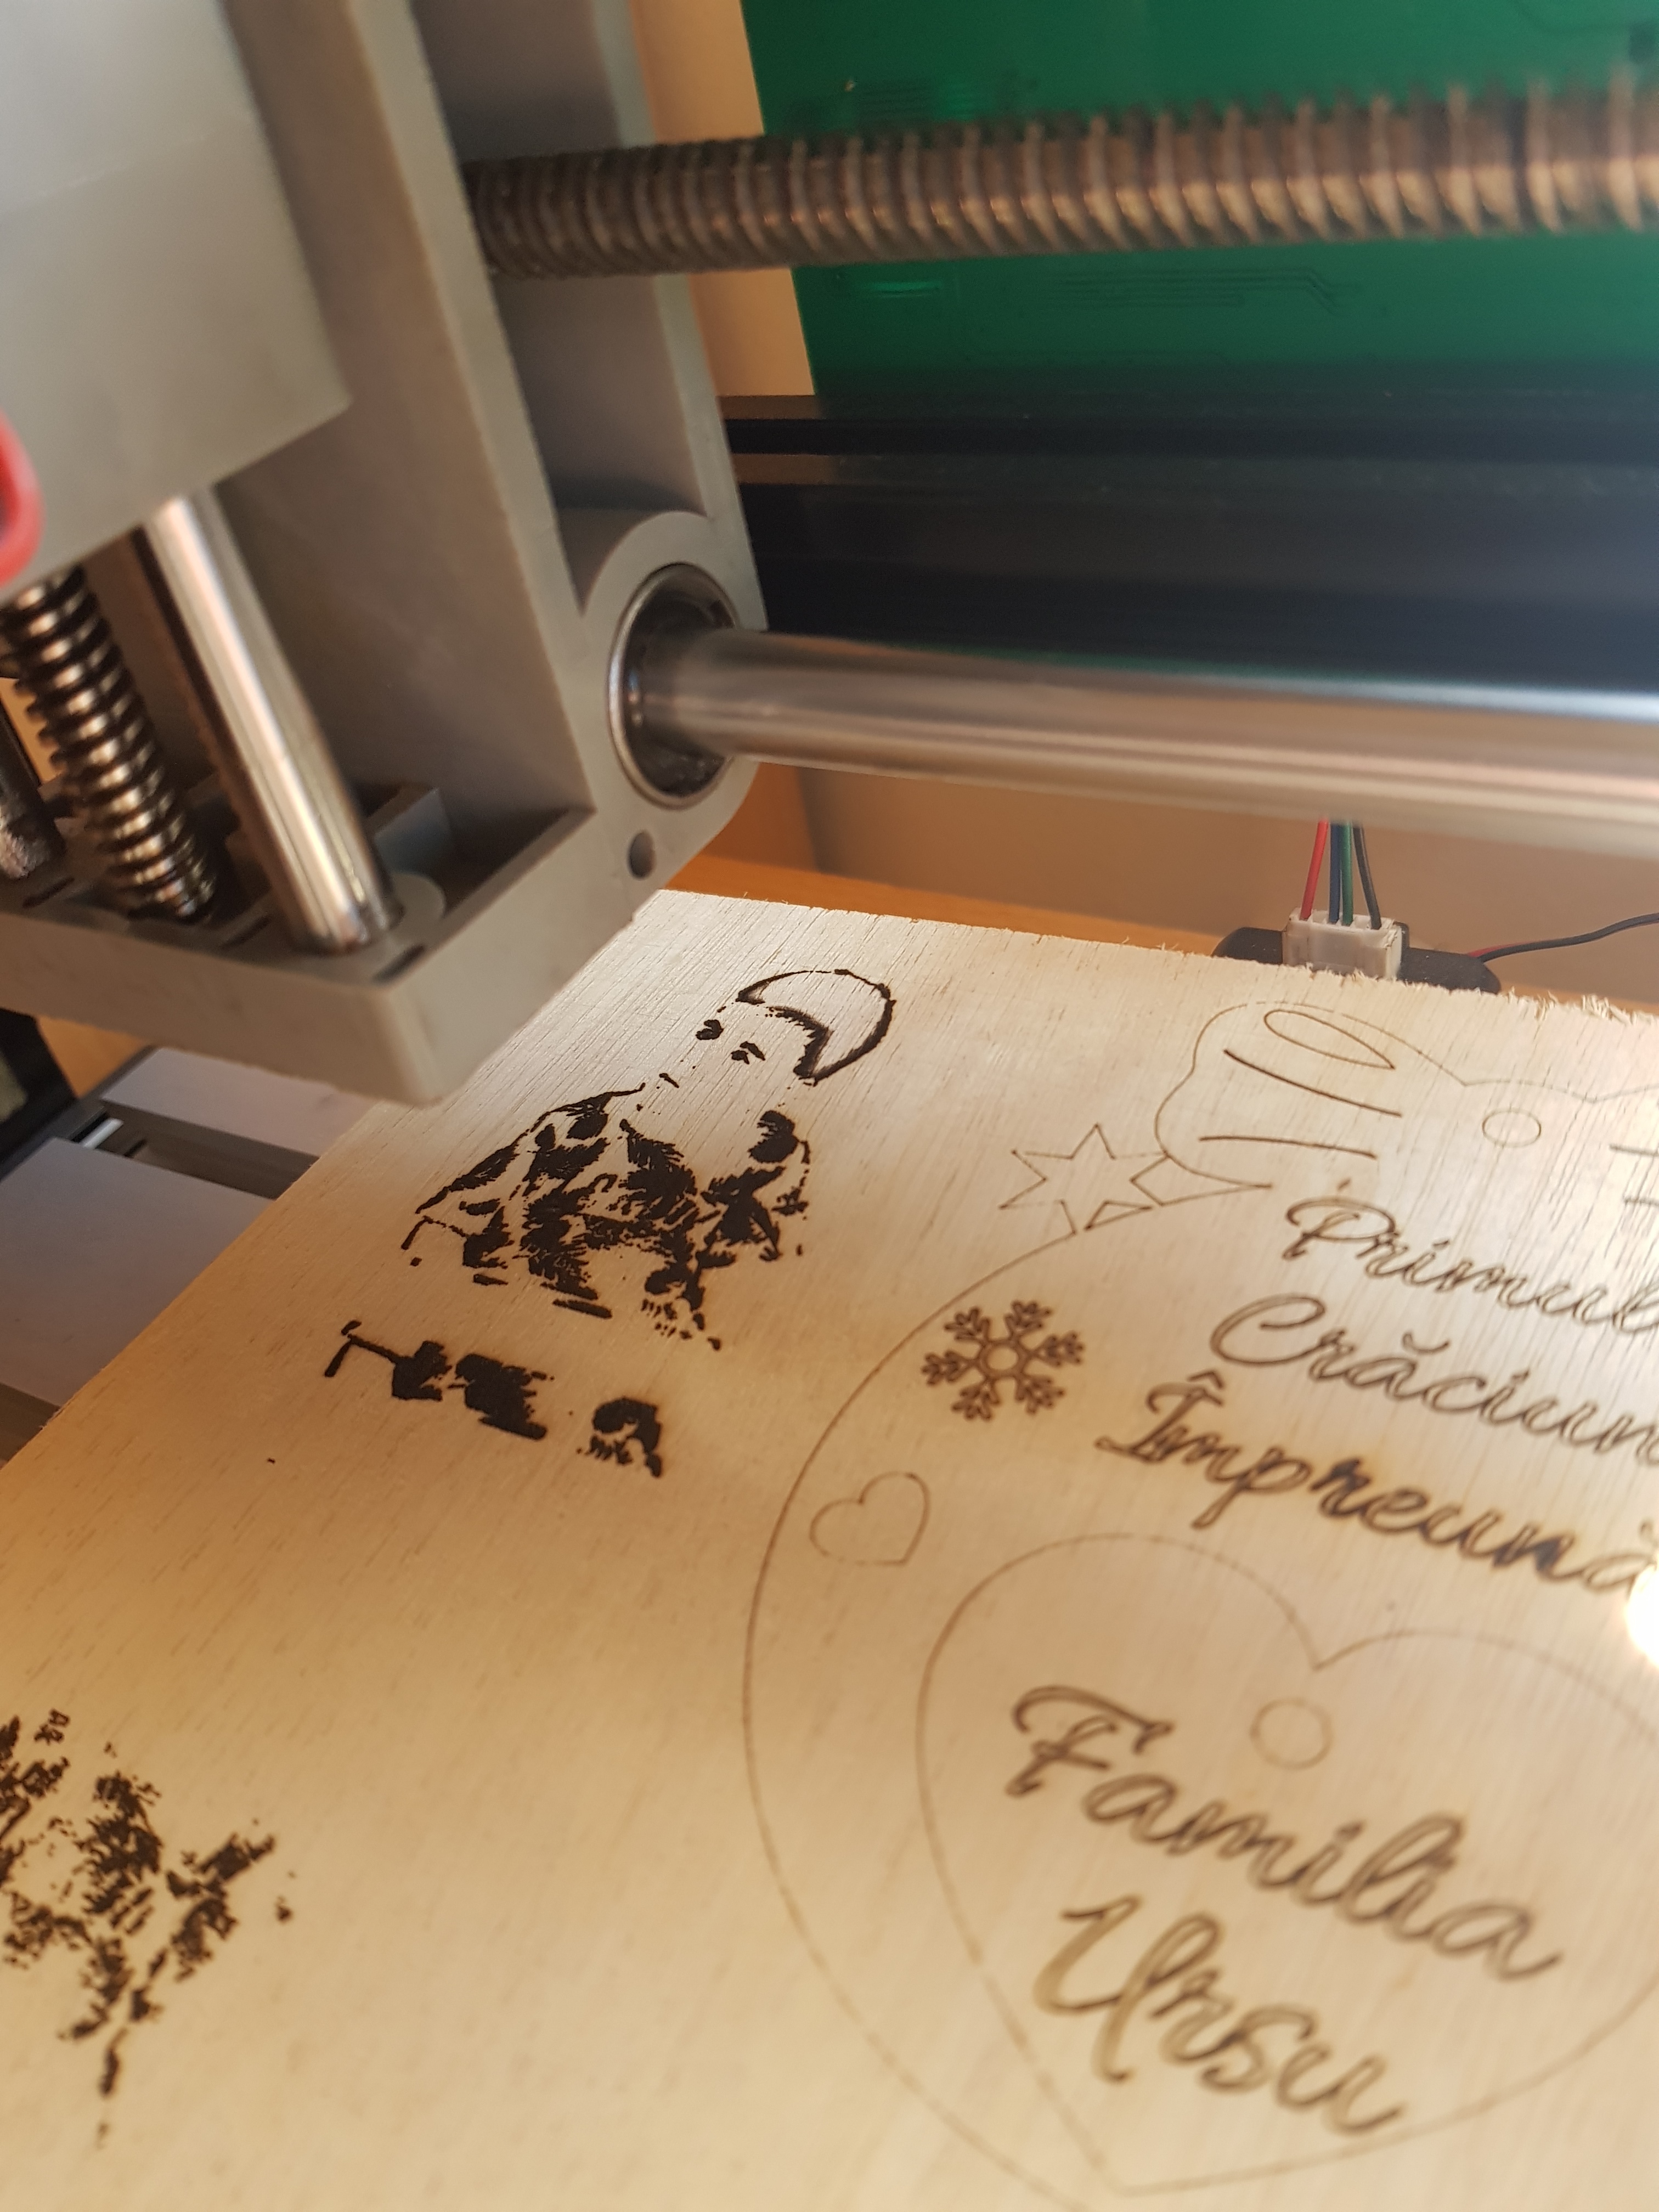 How to Do Engraving Easy and Make It Look Decent - Instructables